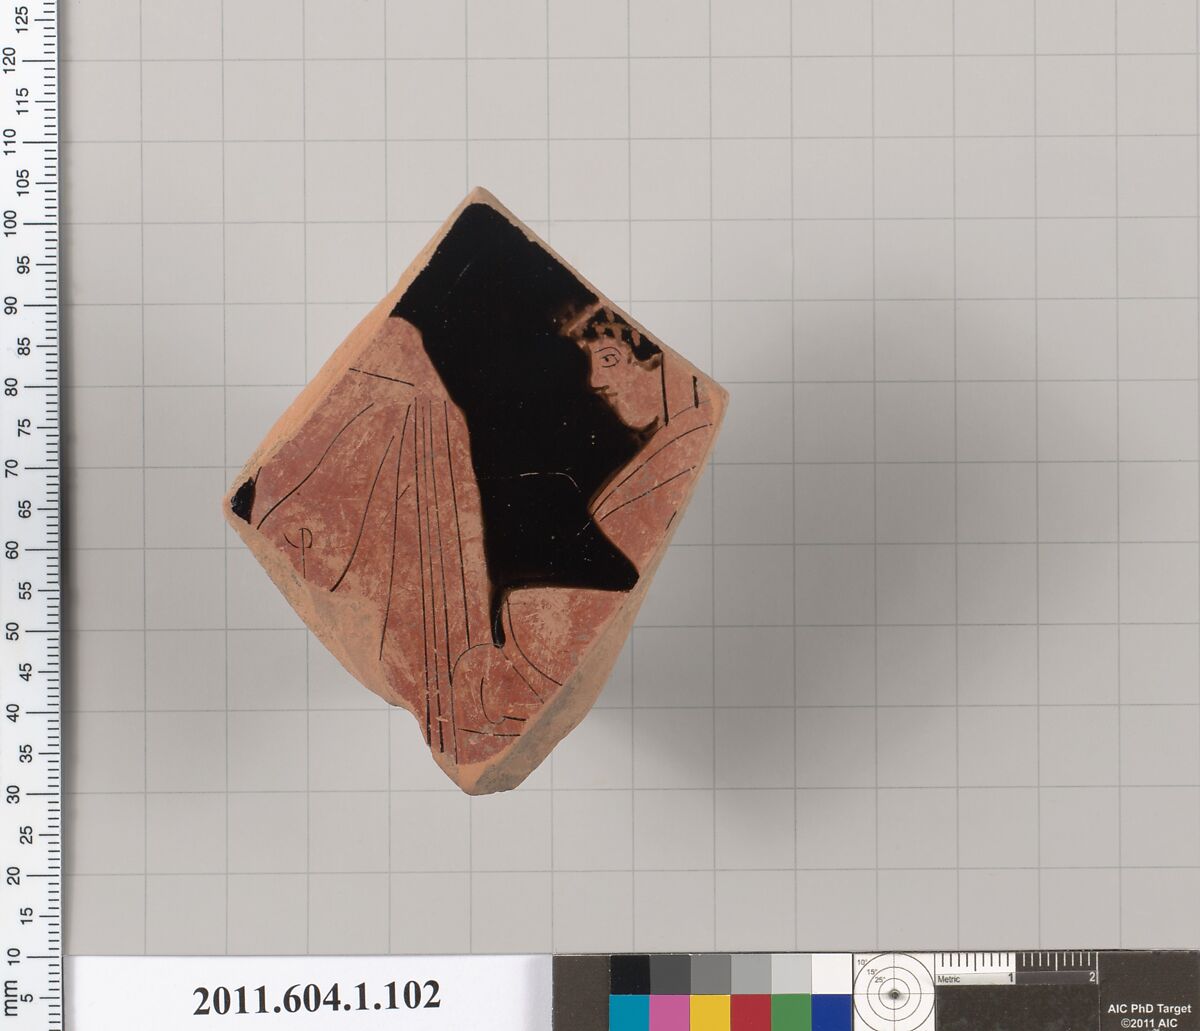 Terracotta fragment of a kylix (drinking cup), Attributed to the Splanchnopt Painter? [DvB], Terracotta, Greek, Attic 